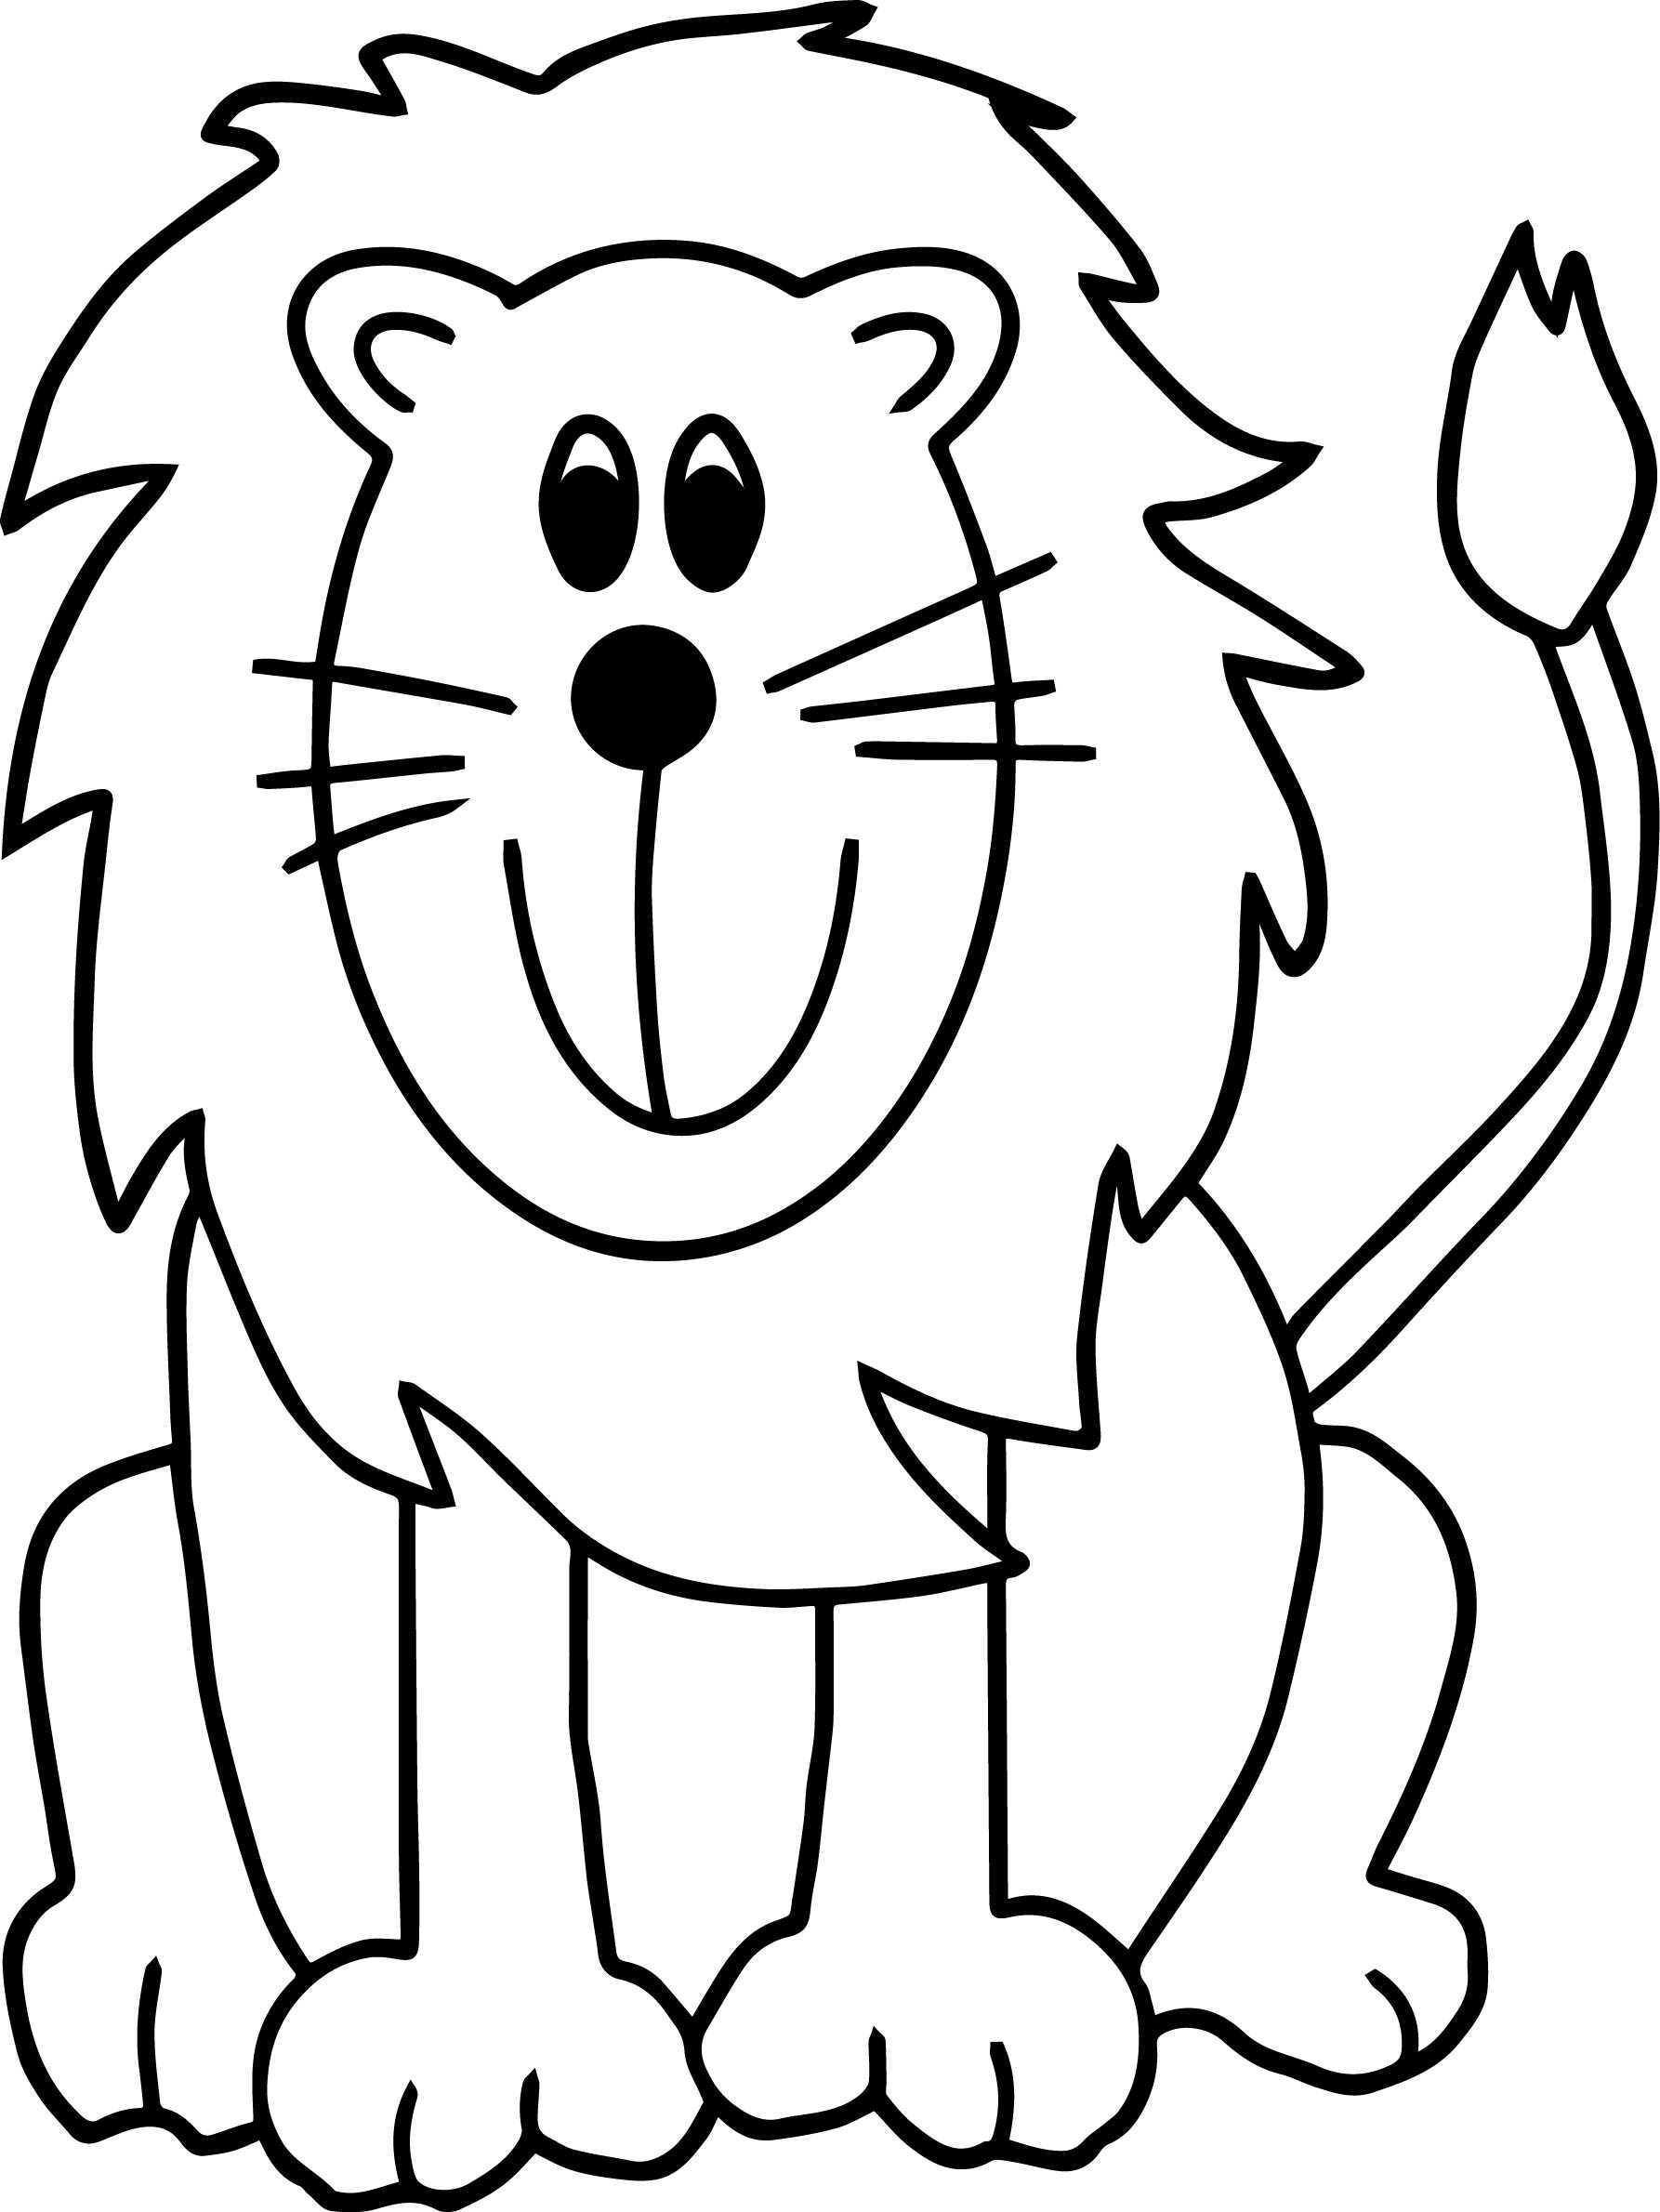 Zoo Coloring Pages | Free download on ClipArtMag